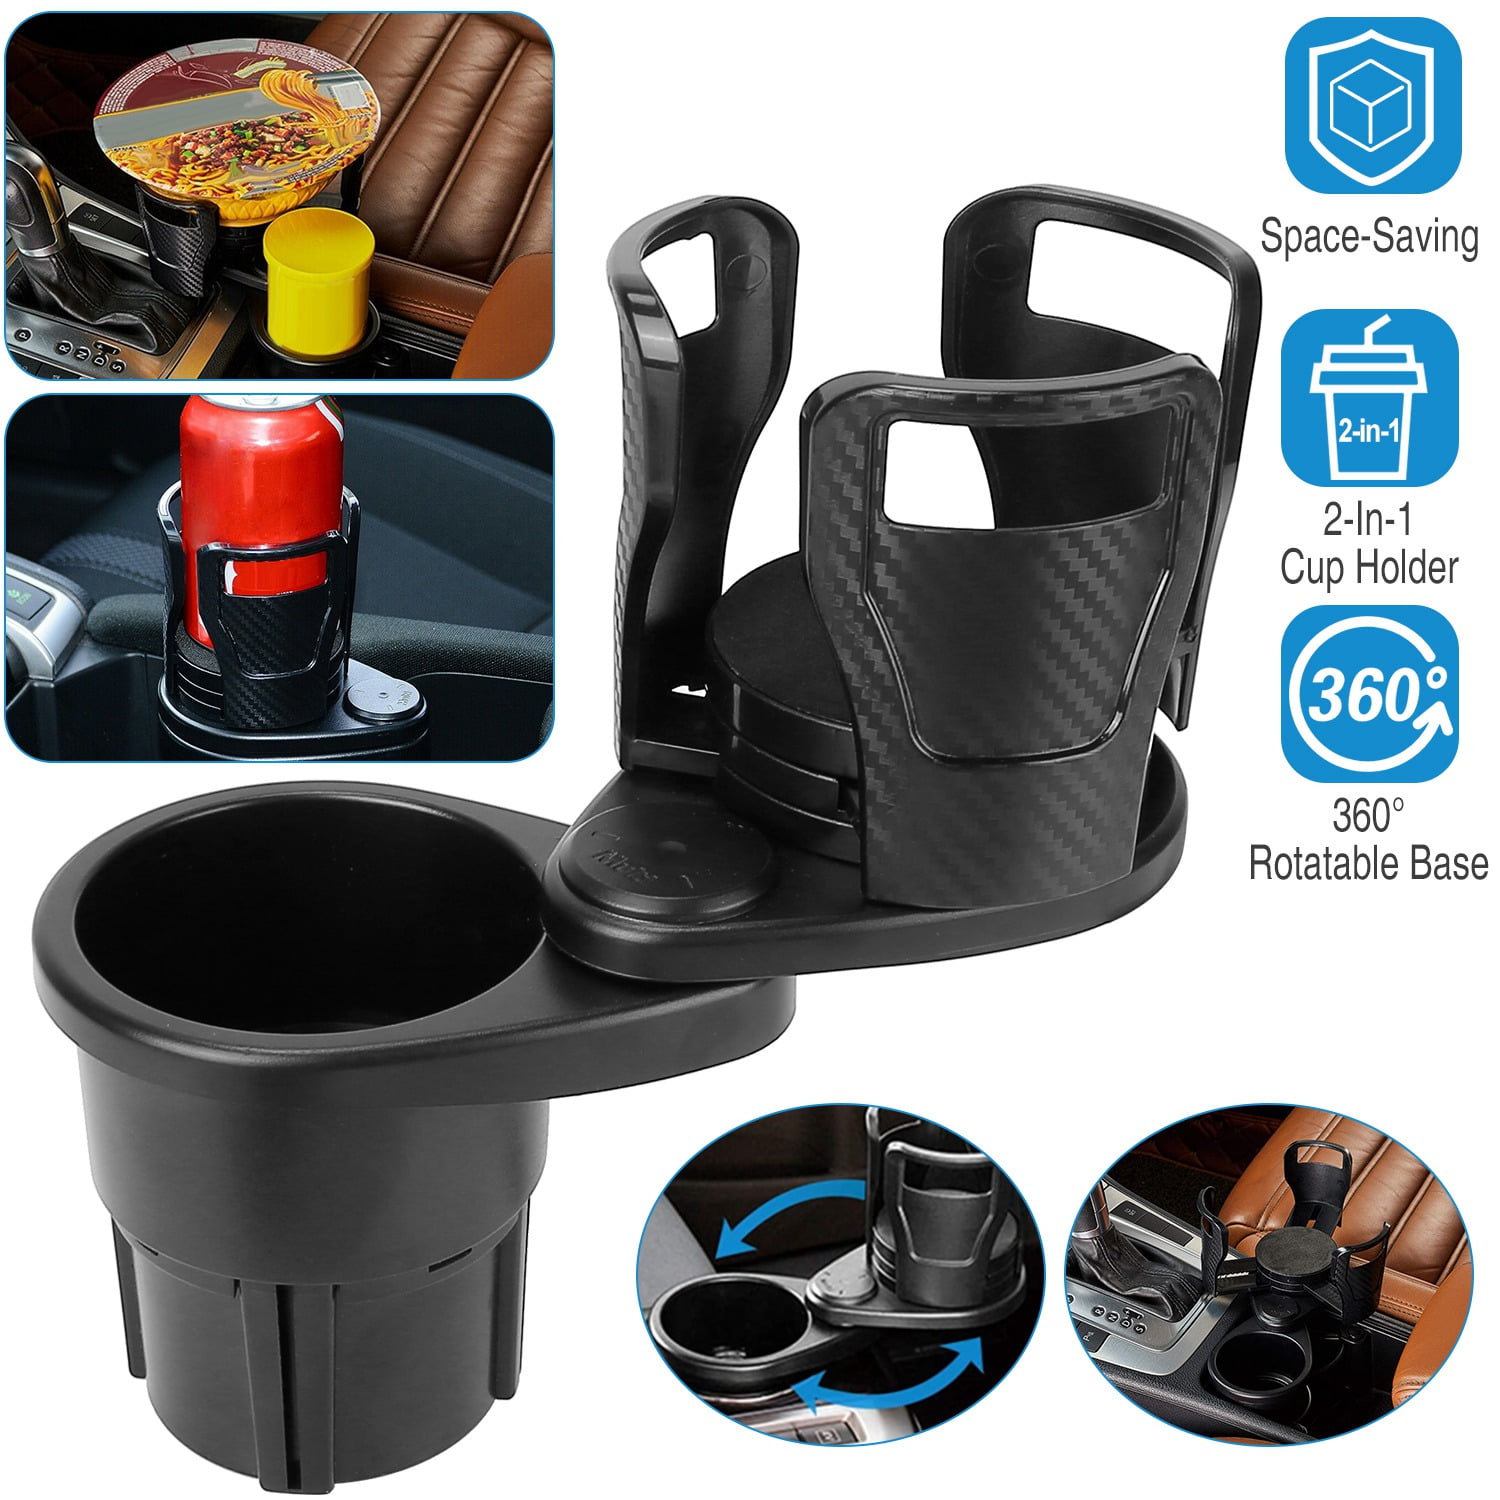 Car Cup Holder Expander Adapter - 2 in 1 MultifuncUniversal Insert